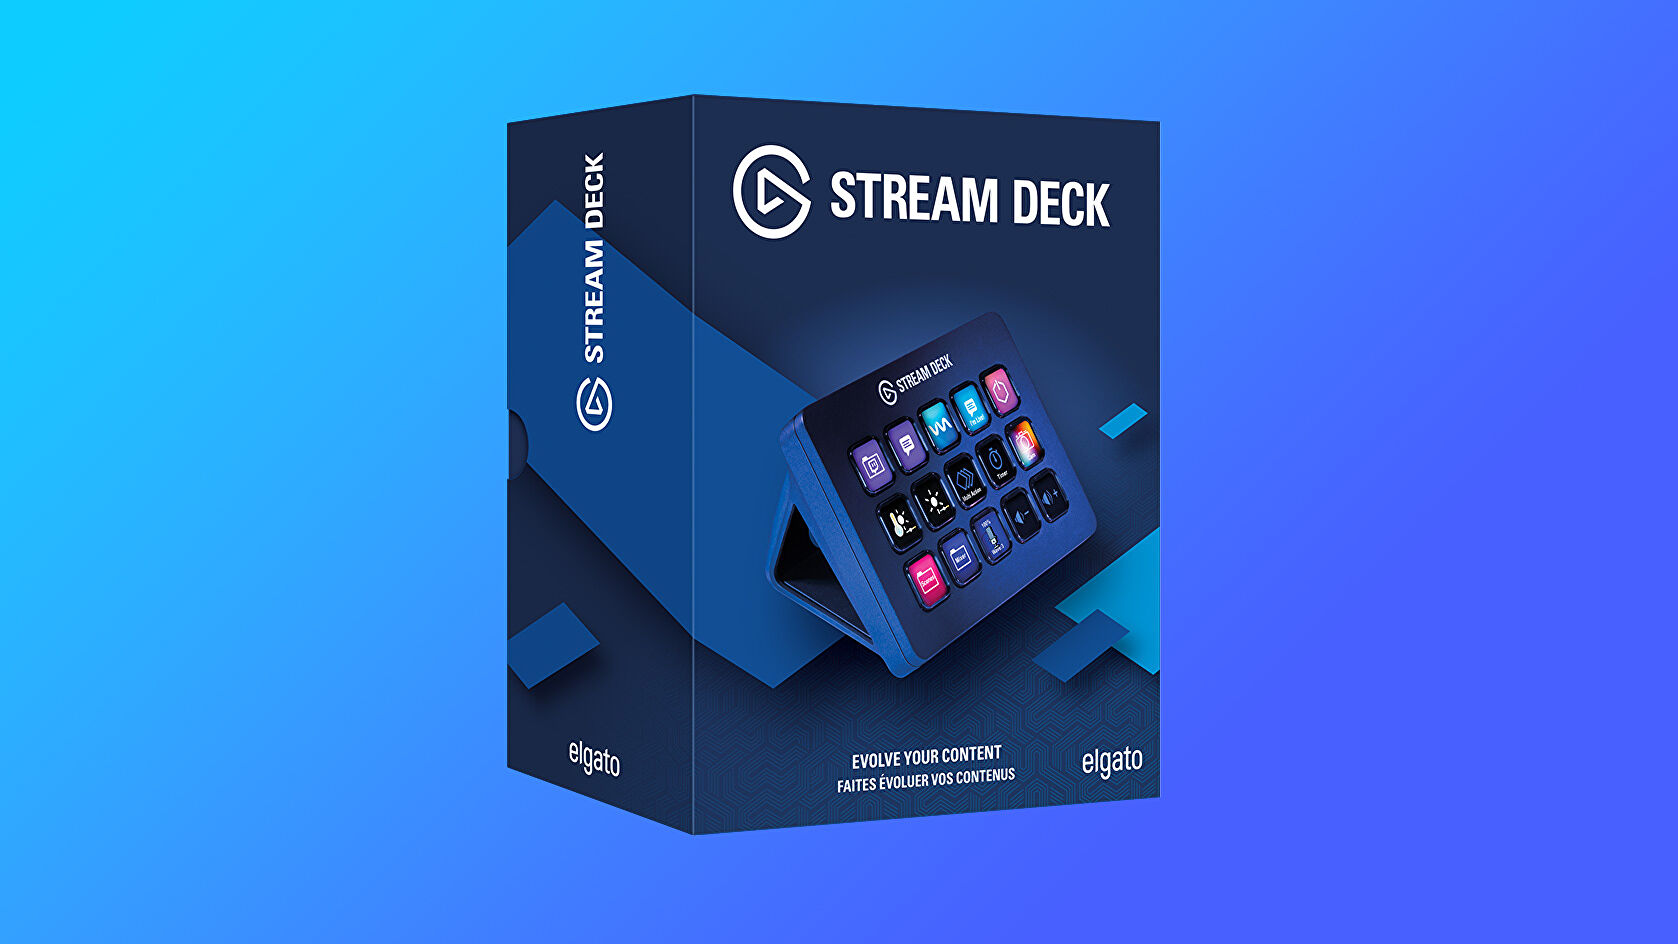 Want a fancy box with 15 programmable buttons? Elgato’s Stream Deck MK.2 is 30% off